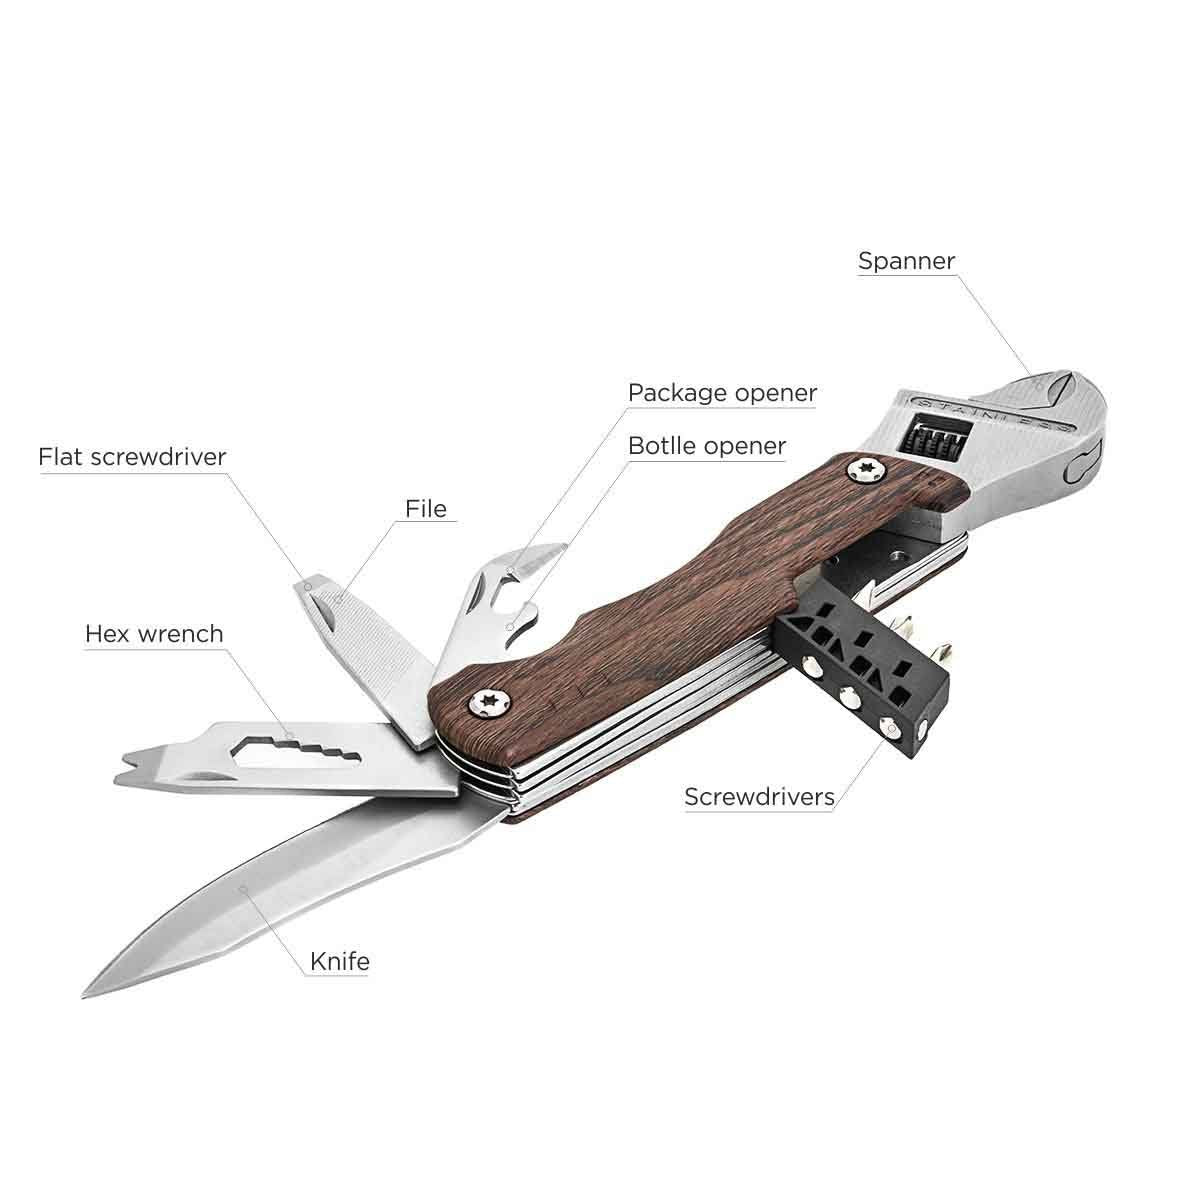 This 8-in-1 multitool delivers a lot of useful stuff: adjustable wrench, three screwdriver bits, knife, bottle opener, file, nut wrenches, spanner, and pry tool